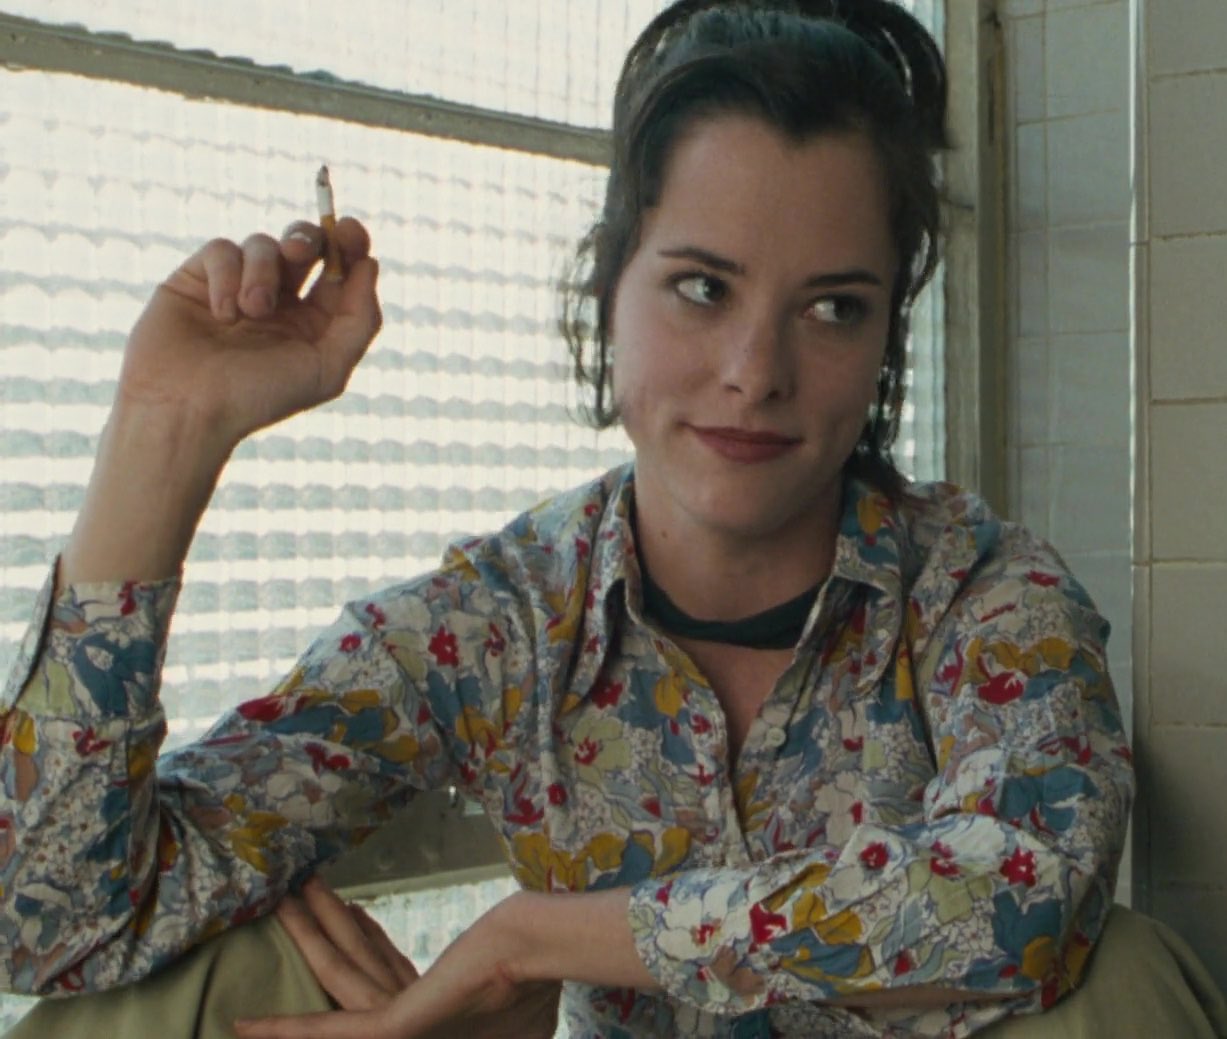 HAPPY BIRTHDAY TO PARKER POSEY!!!!!! <3 I LOVE HER SO MUCH 